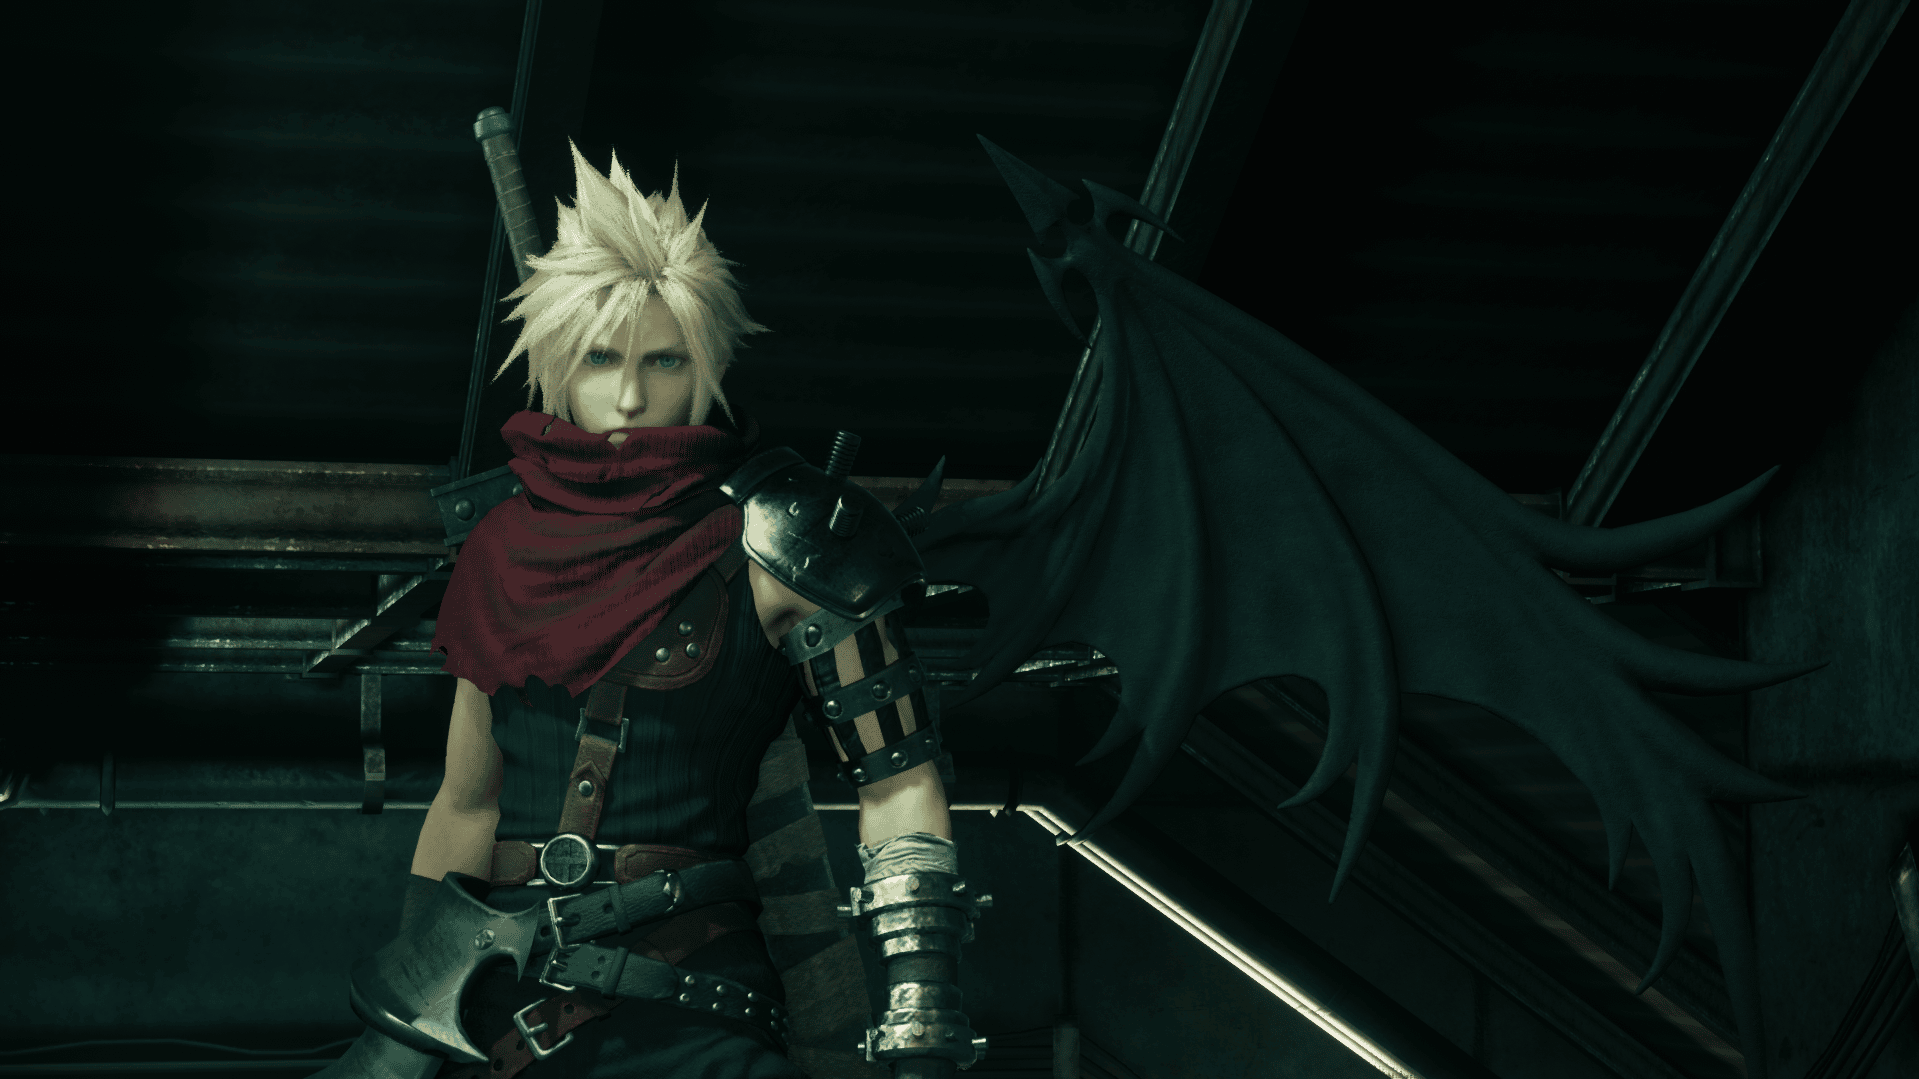 Final Fantasy VII Remake RE2 Remake Mod Allows You to Play As Cloud Strife